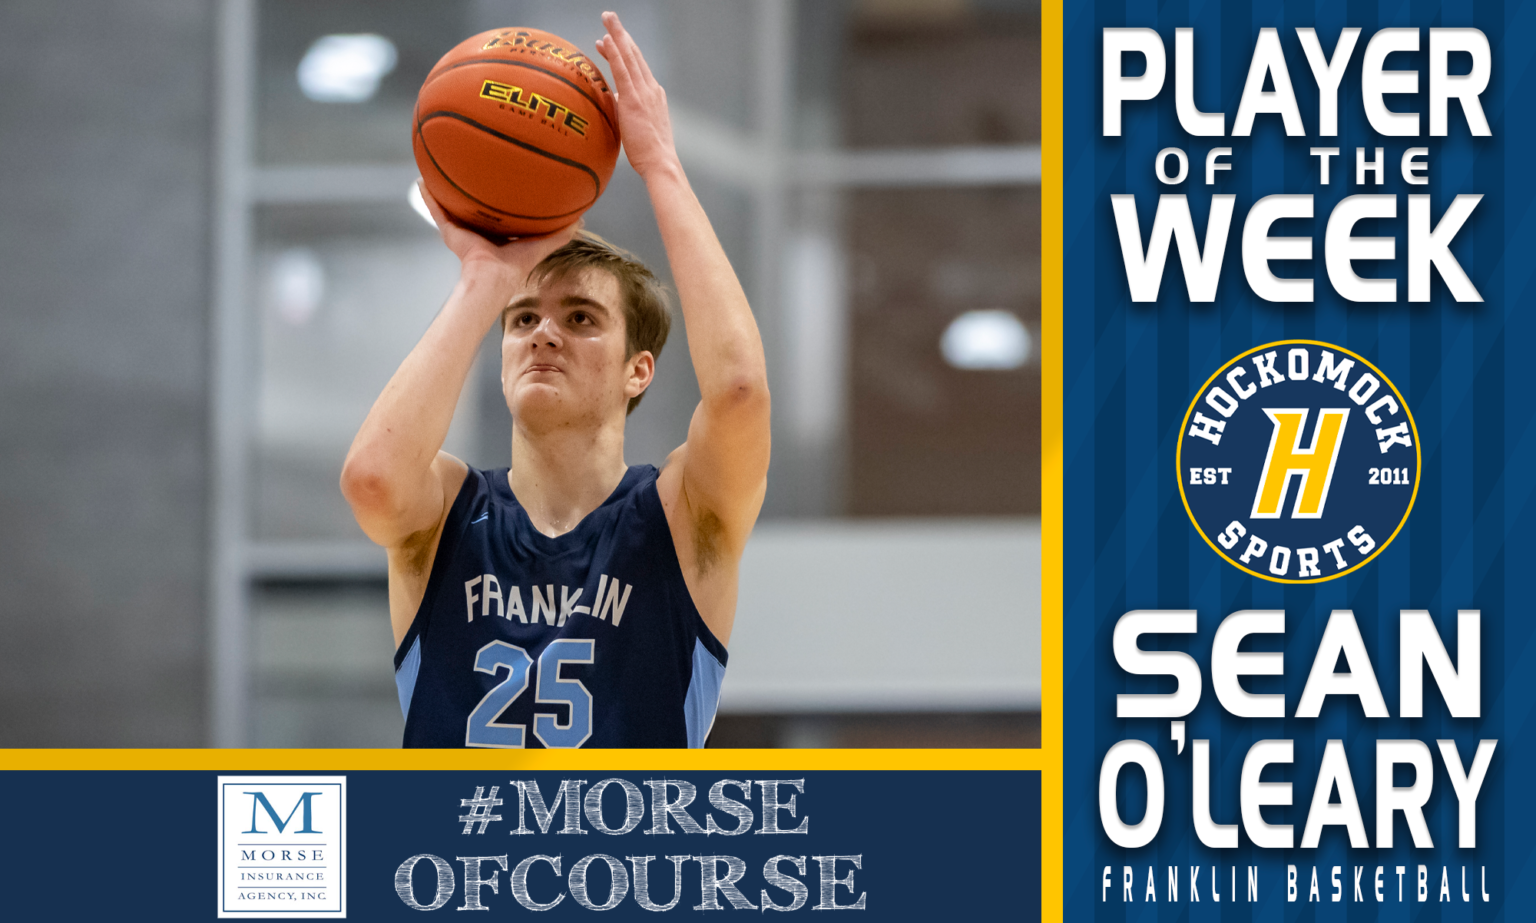 HockomockSports.Com selects Sean O’Leary, FHS Basketball as Player of the Week